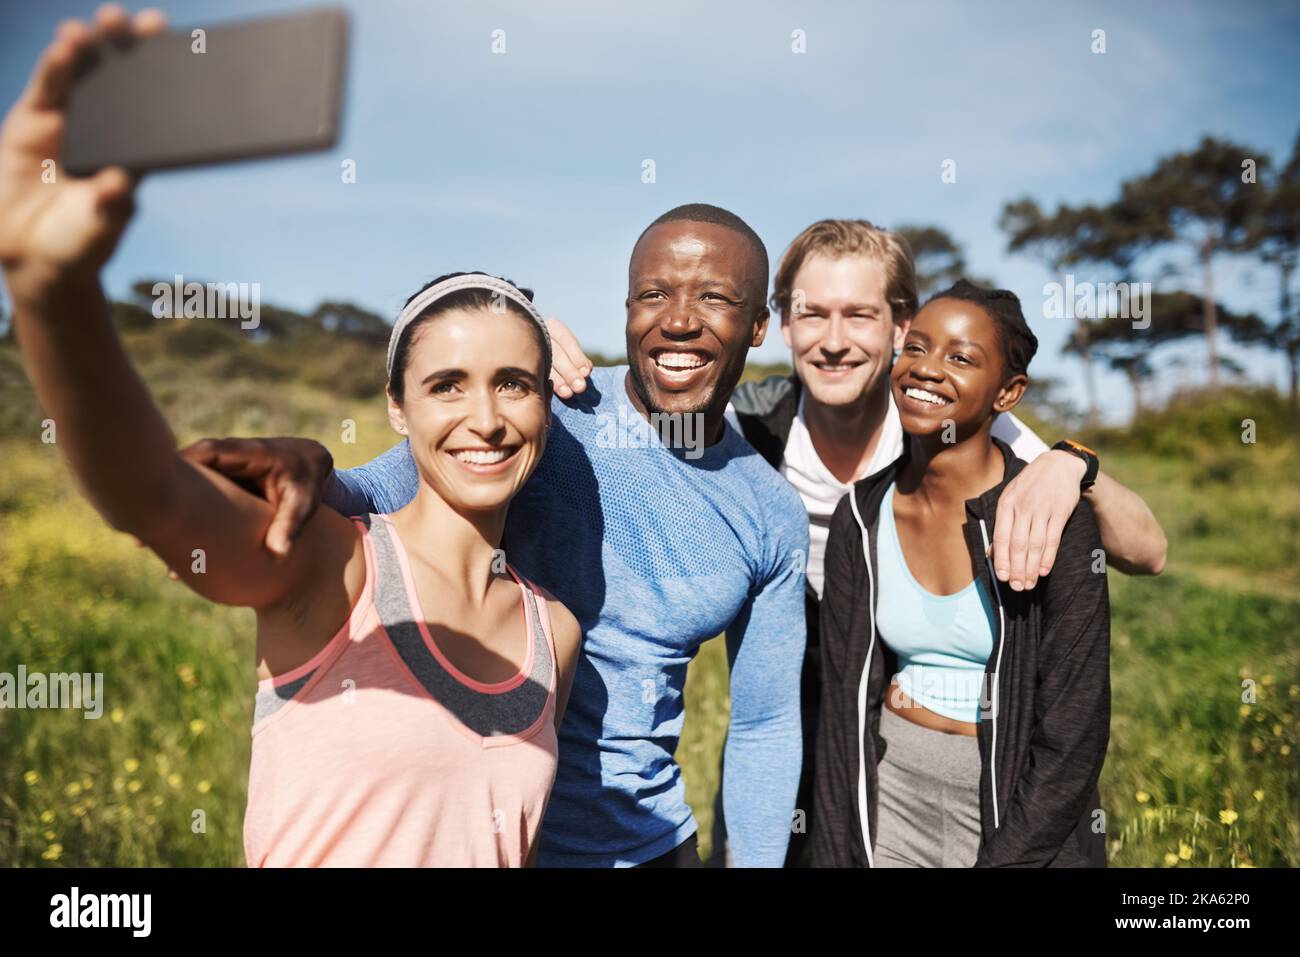 This one will be my profile picture. a group of friends taking a selfie outdoors after their workout. Stock Photo